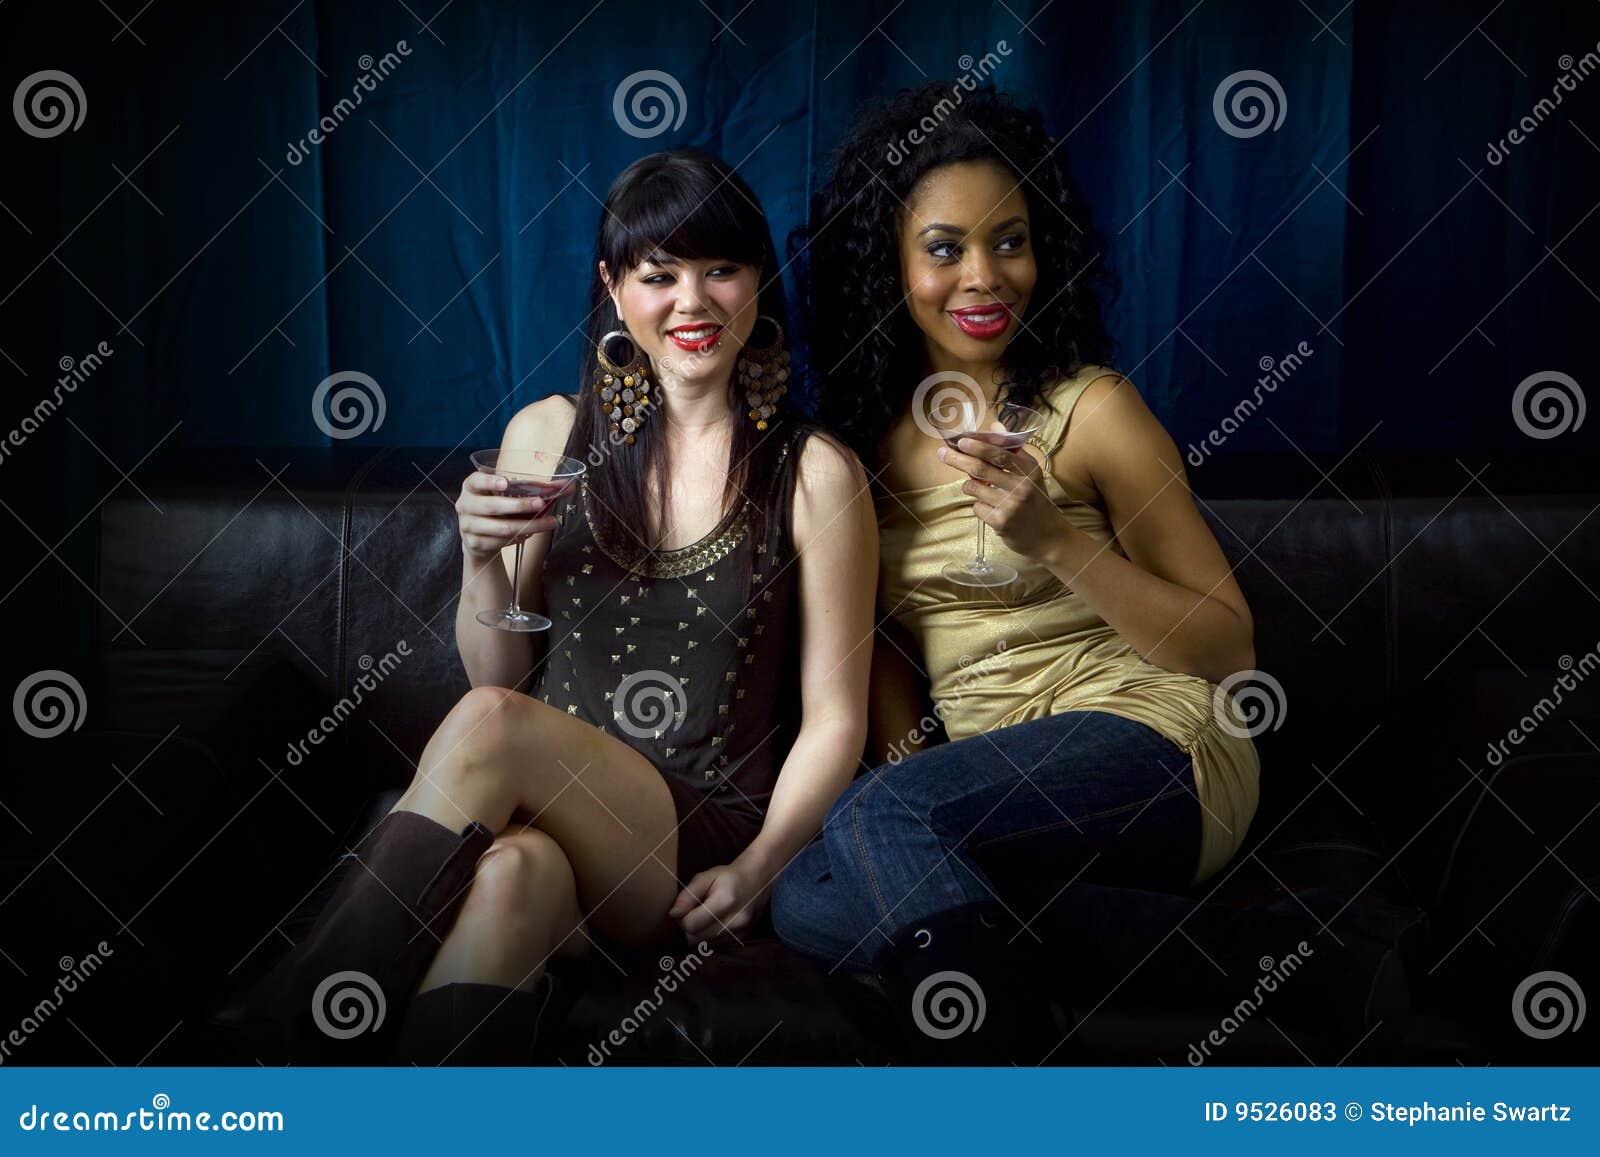 Friends at club stock image. Image of adult, people, club - 9526083